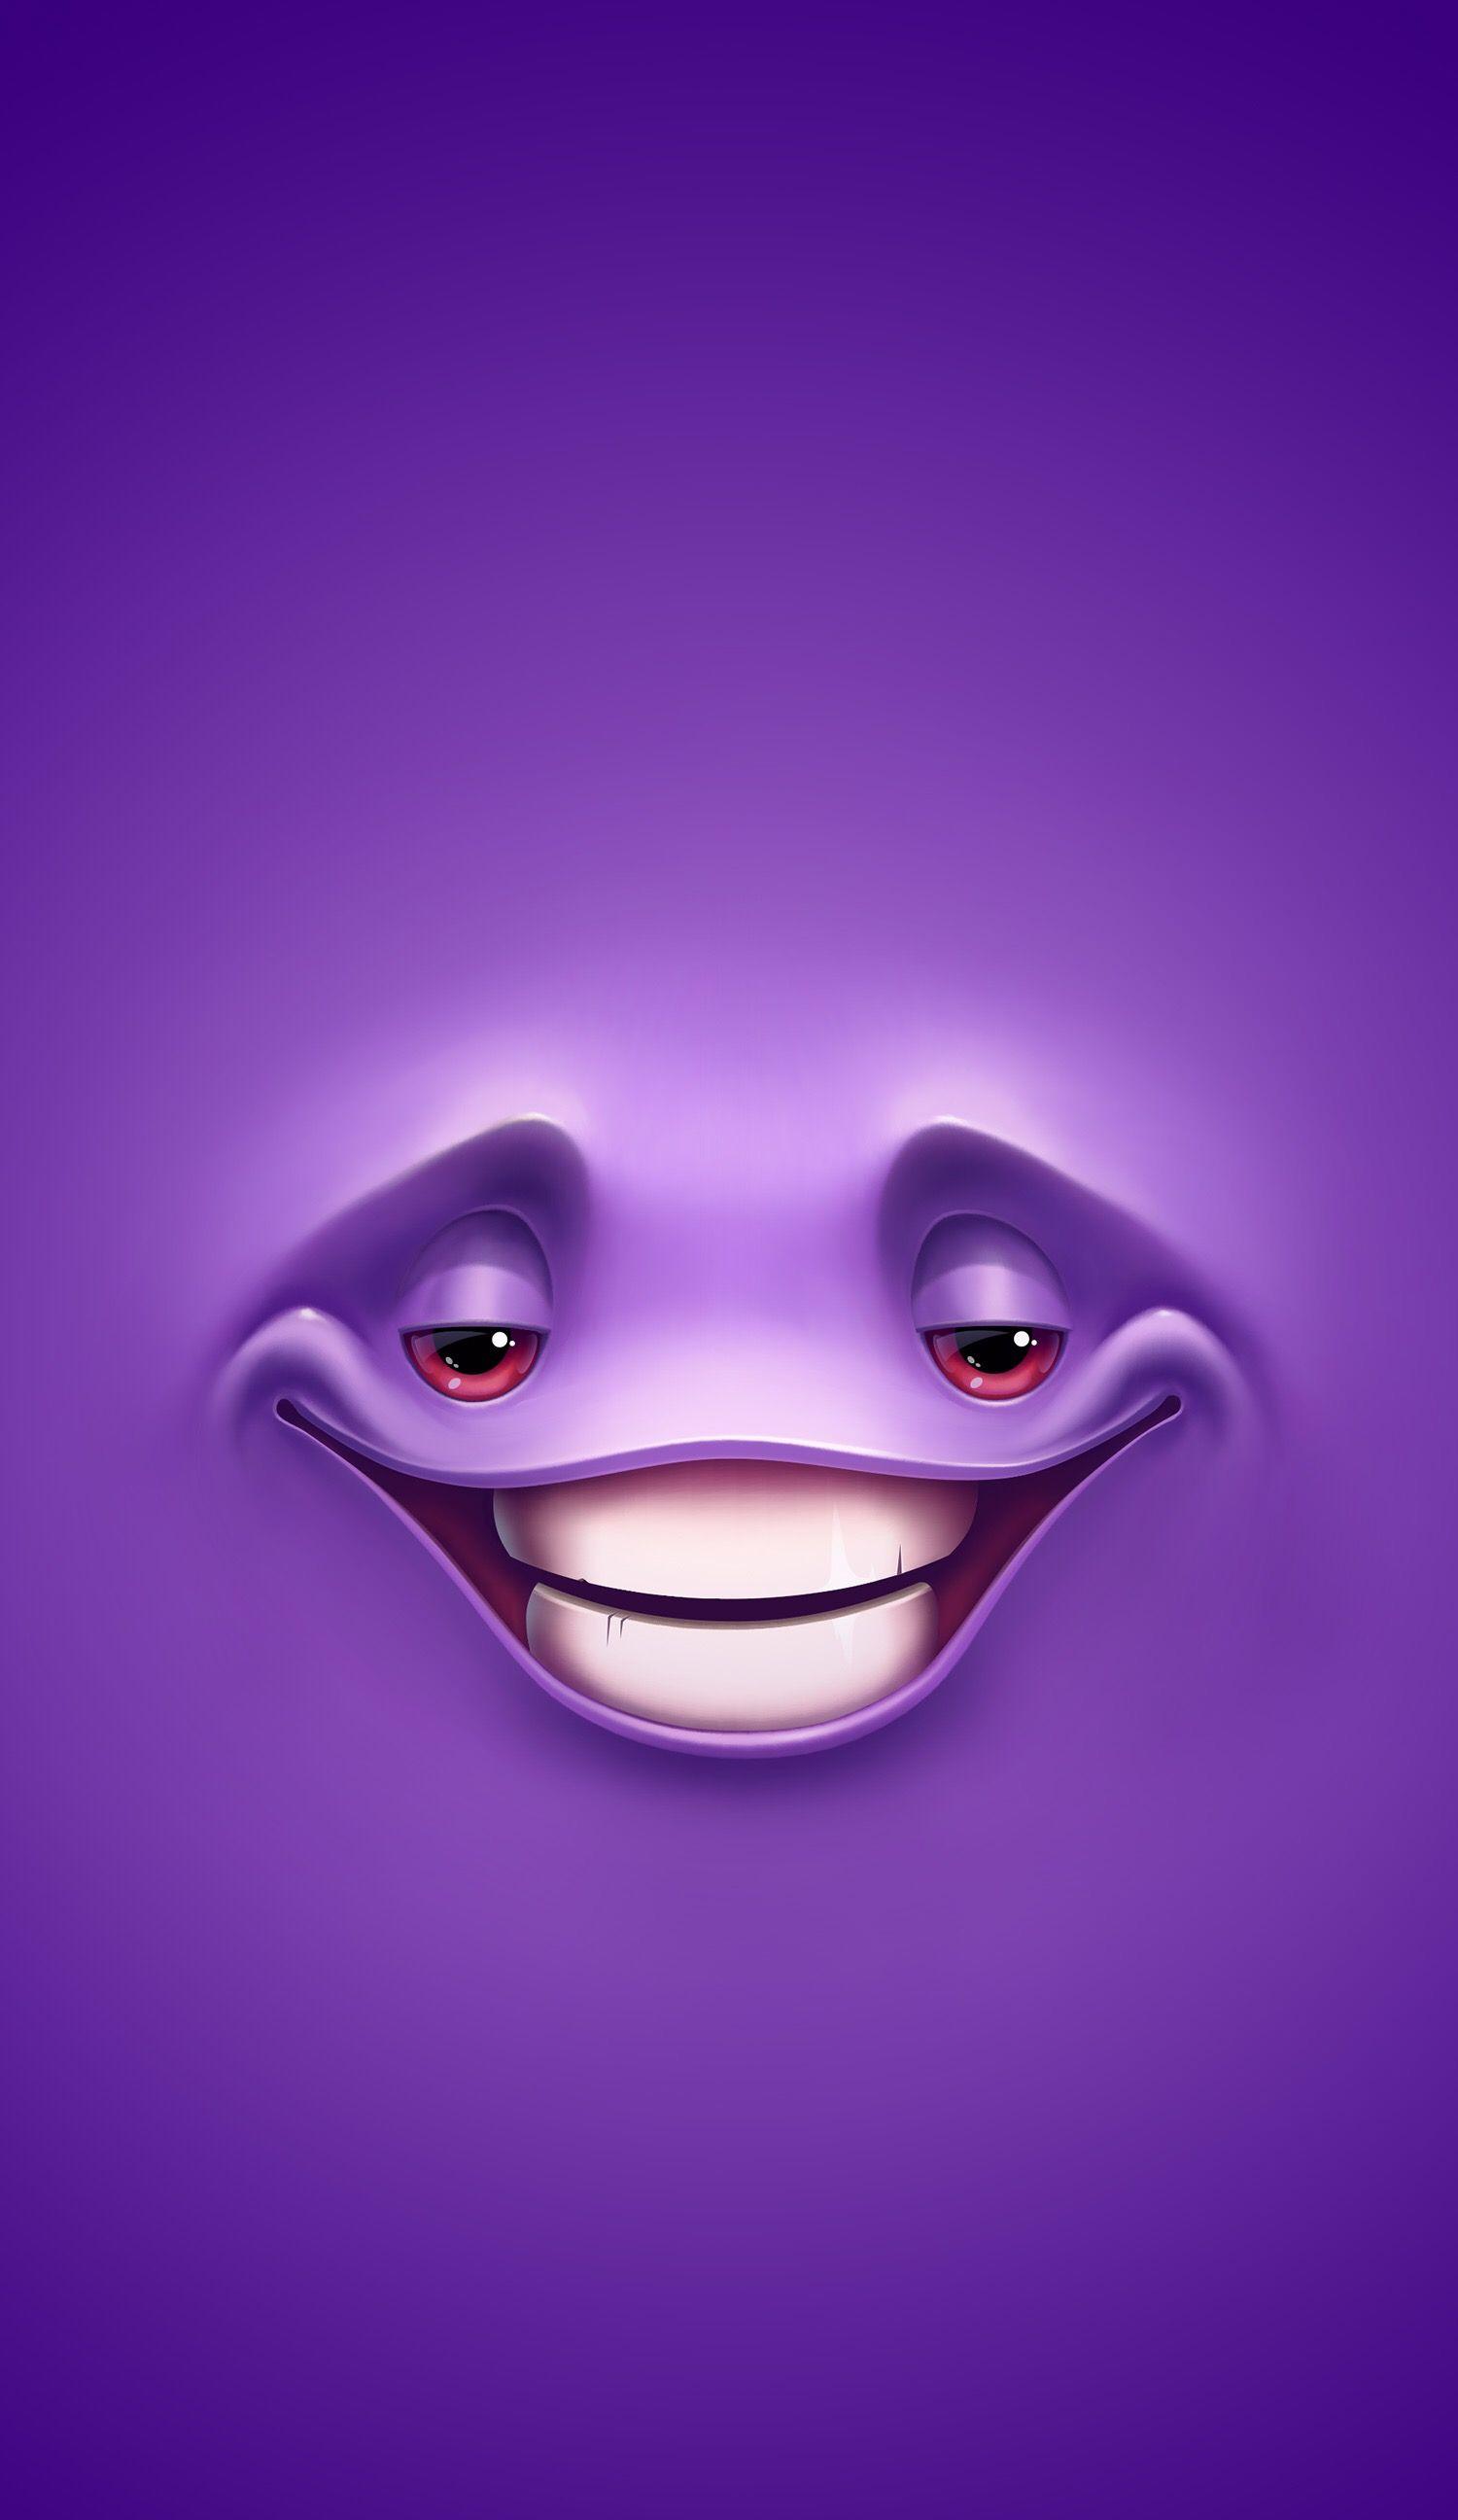 Say Cheese!. Funny iphone wallpaper, Funny wallpaper, Crazy